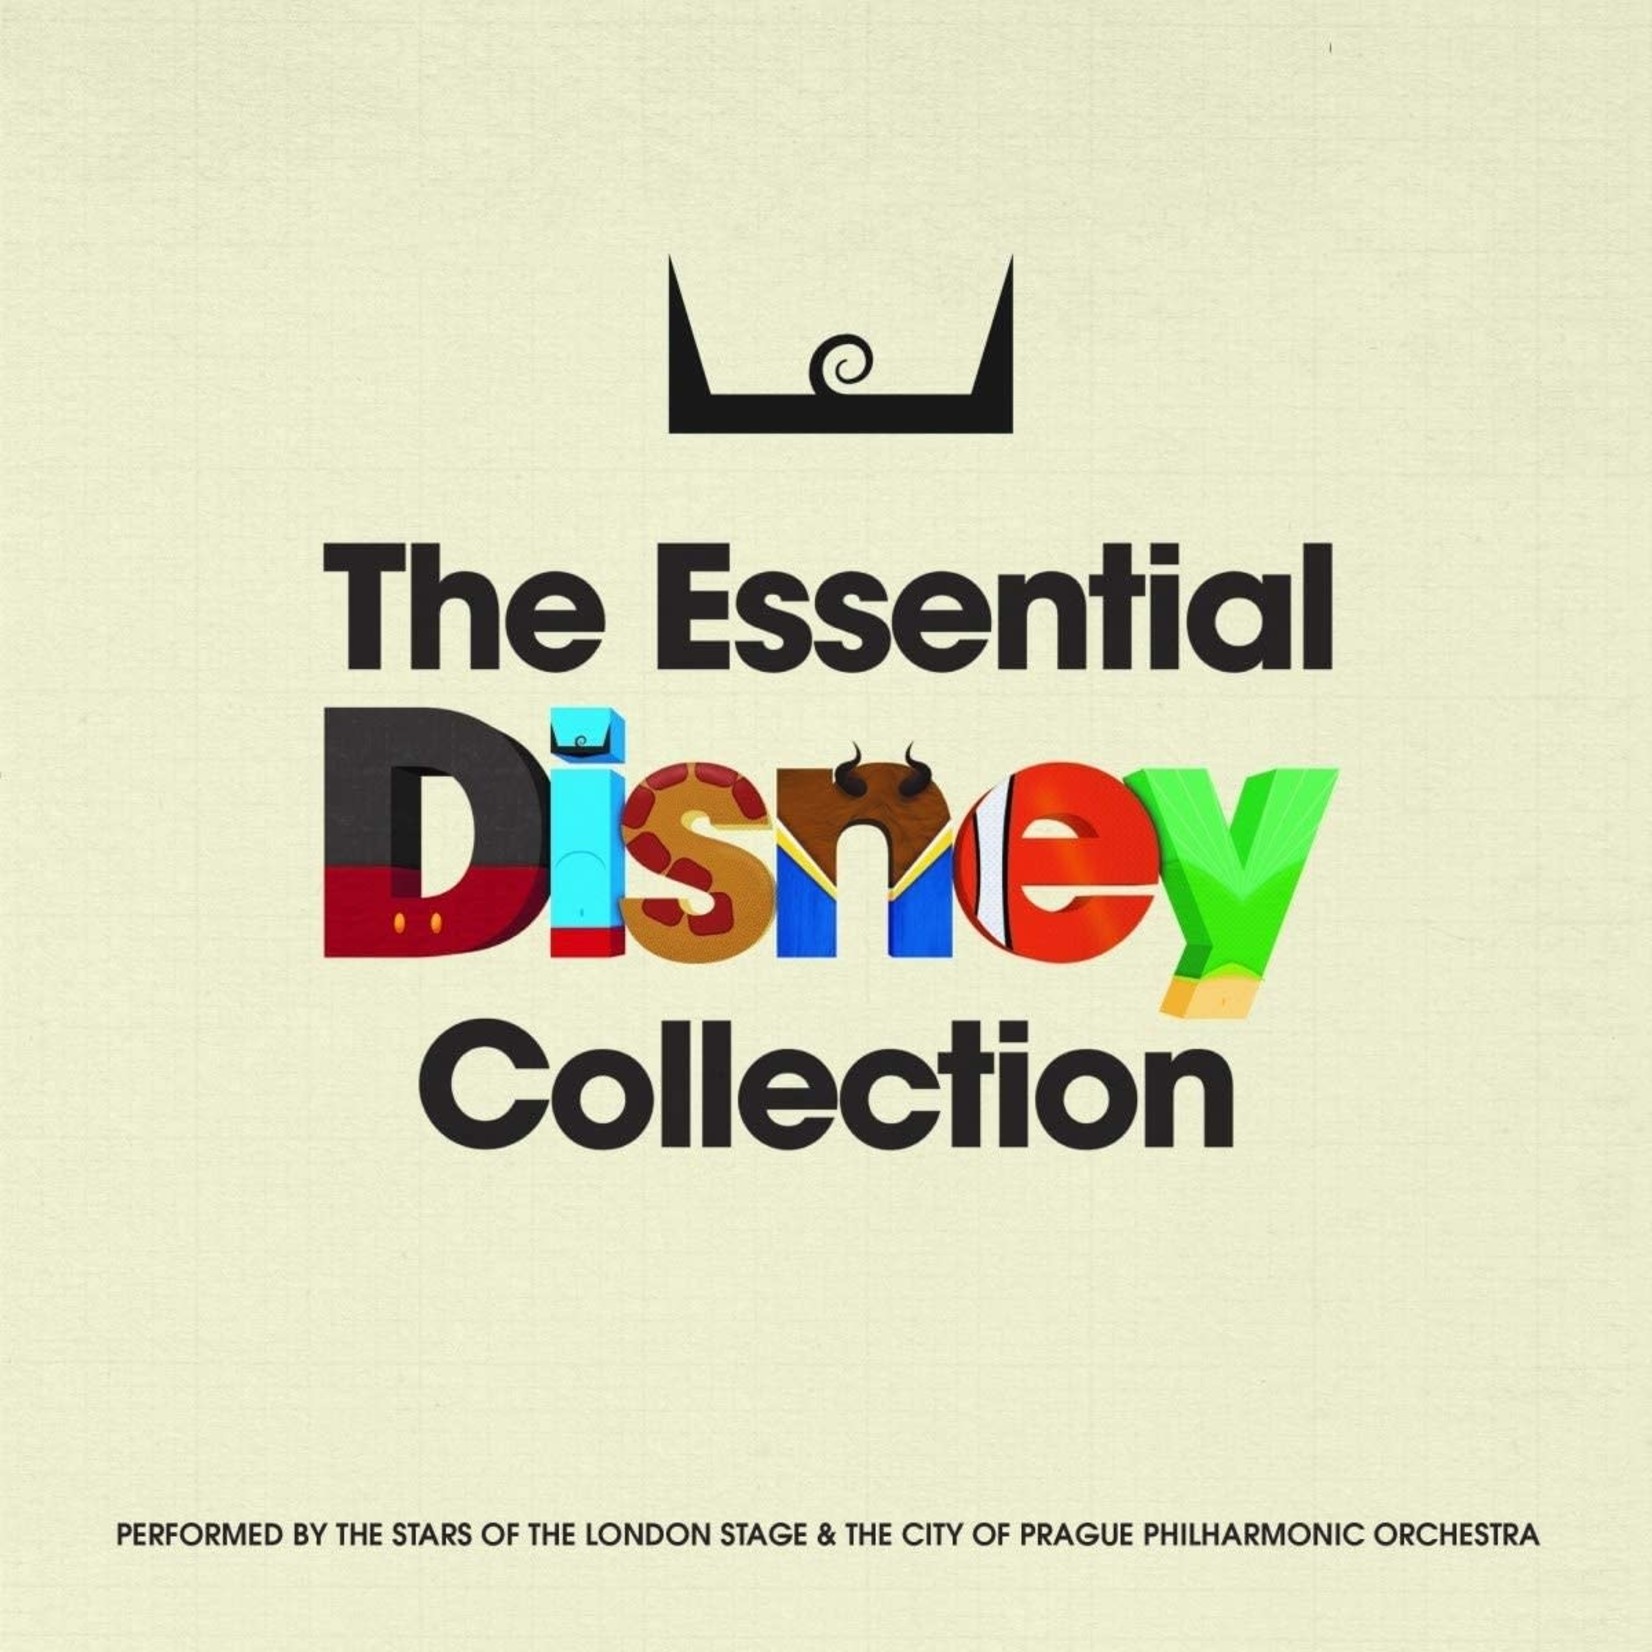 [New] City of Prague Philharmonic Orchestra - The Essential Disney Collection (2LP, soundtrack)